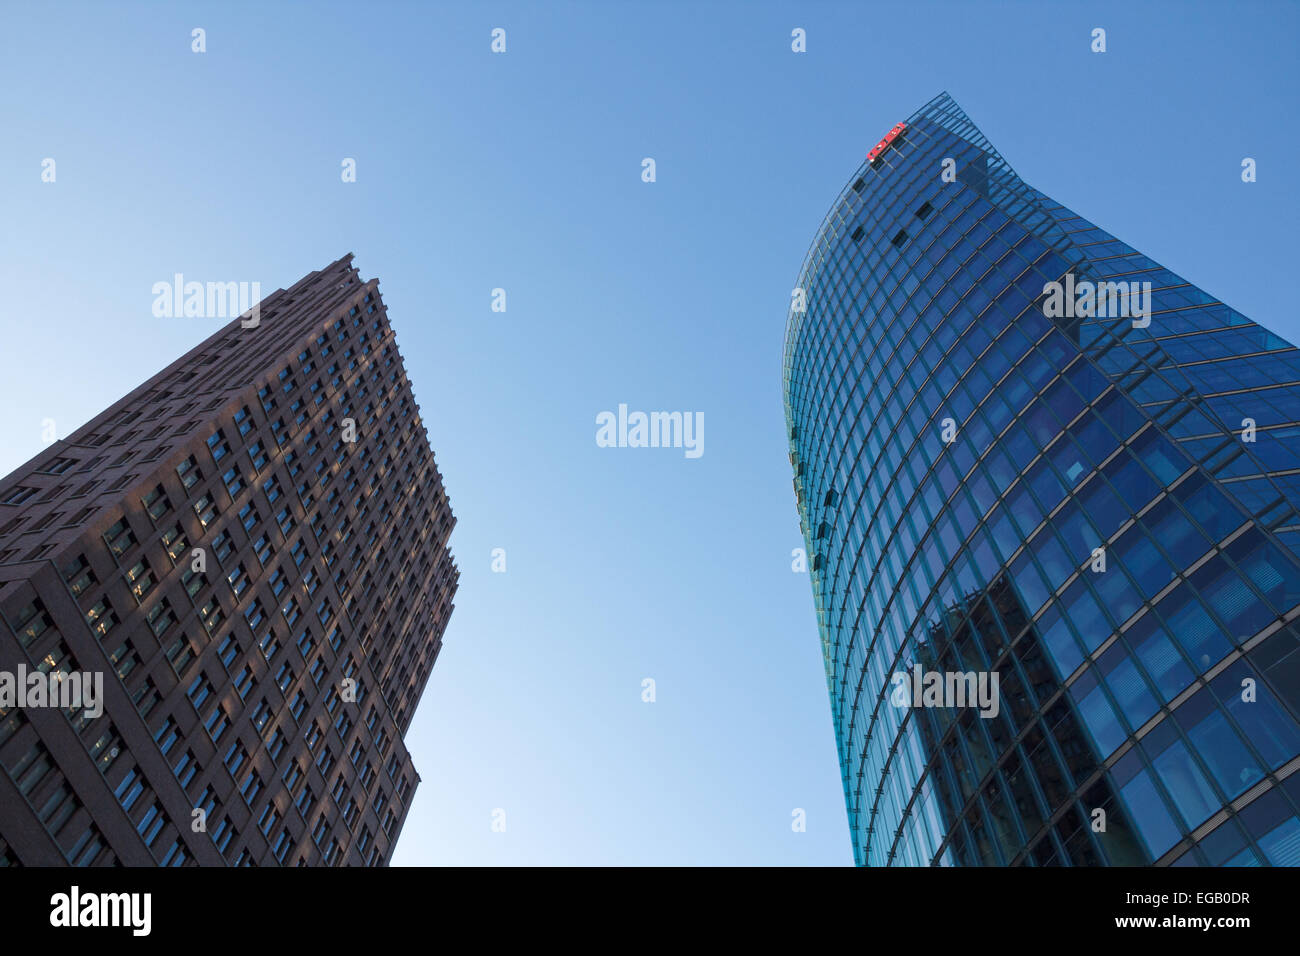 [Editorial Use Only] Kollhof tower and DB tower during sunset at the Potsdamer Platz, Berlin, Germany Stock Photo